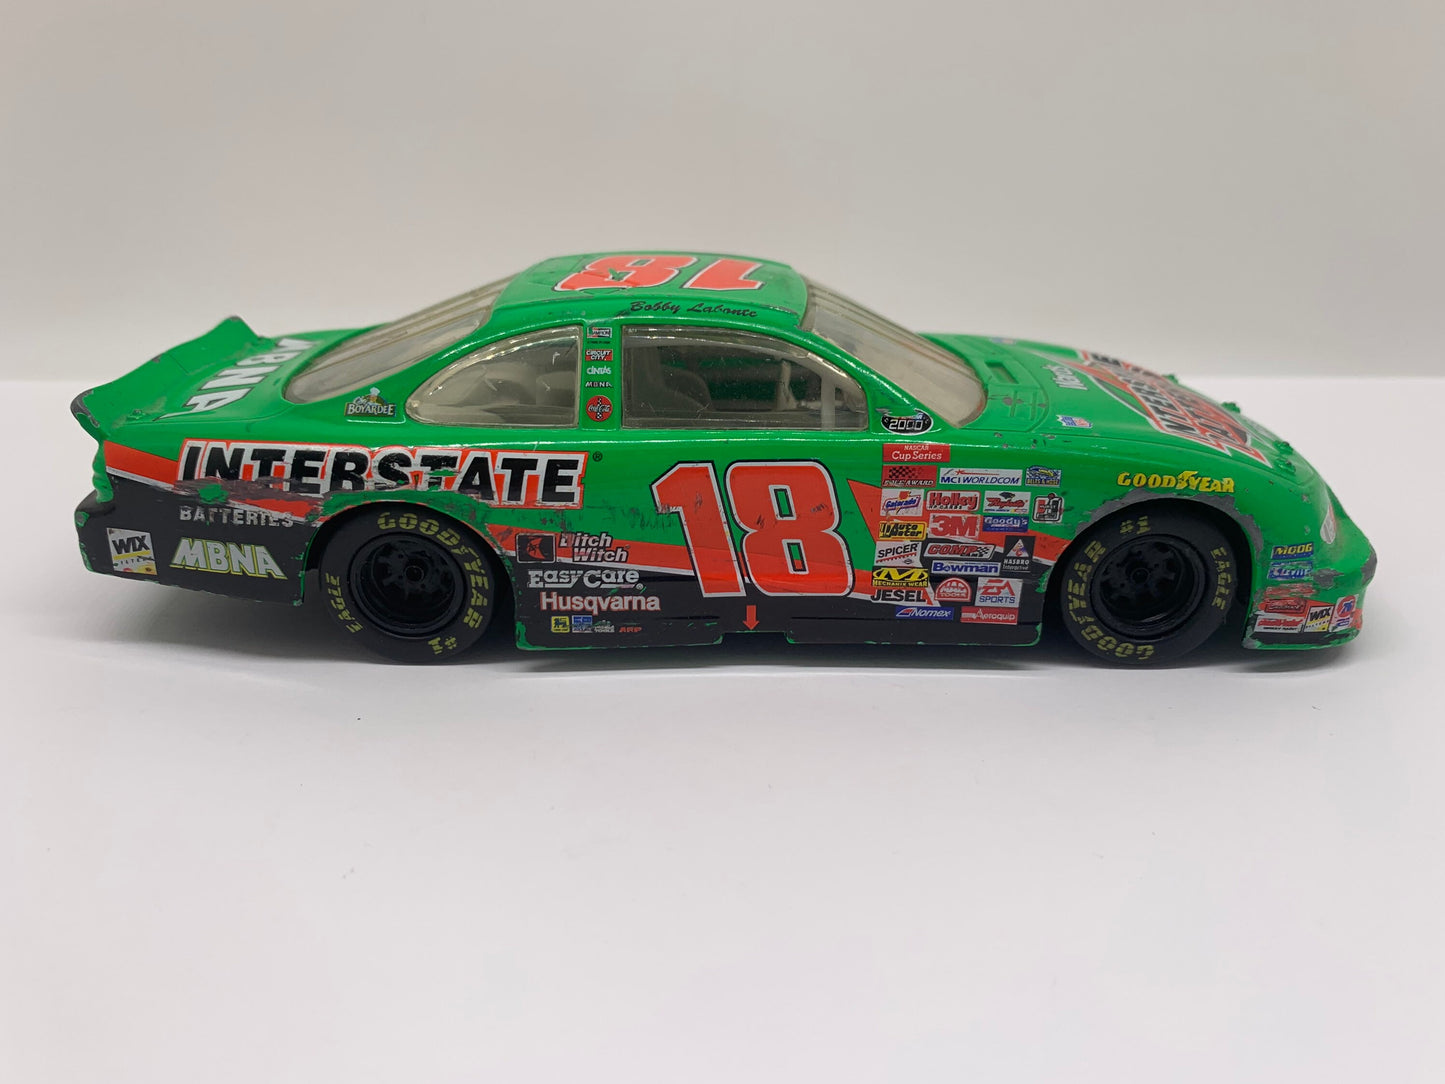 Interstate Batteries 1999 Pontiac Grand Prix Stock Car Green Hasbro Collectable Replica Scale Model Toy Car Nascar Car Perfect Birthday Gift